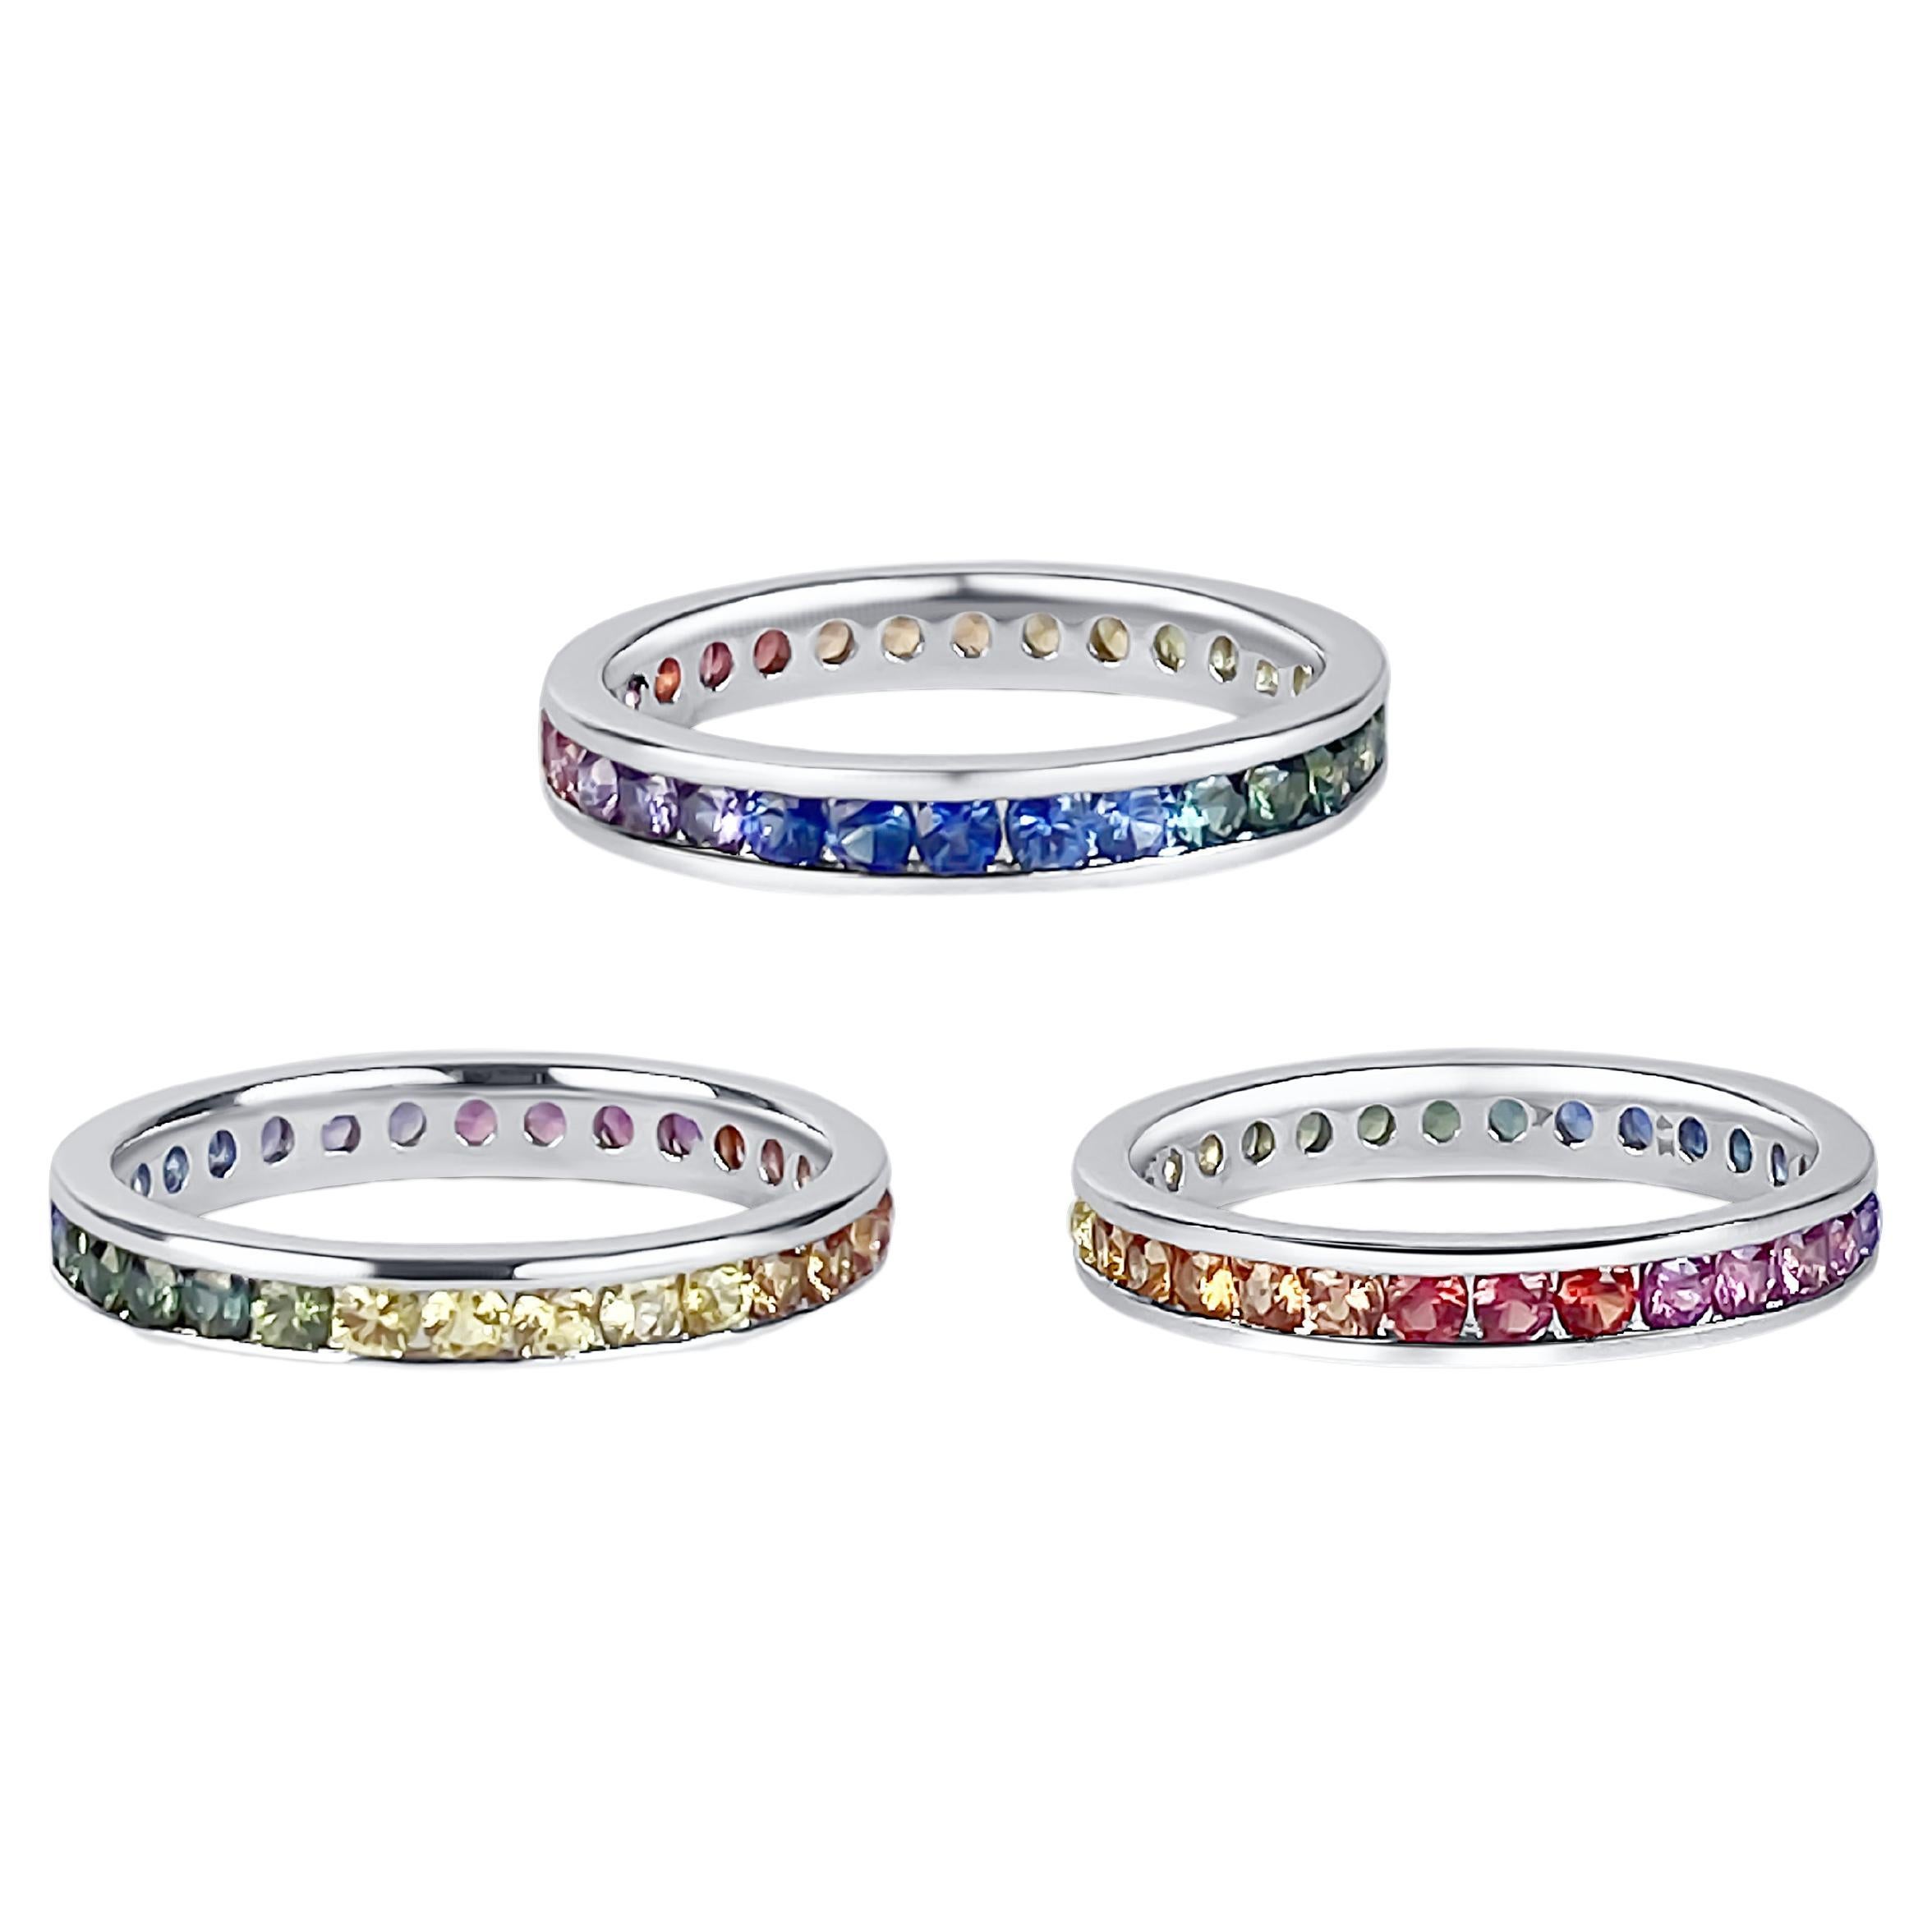 Introducing our stunning set of Ceylon natural sapphire ring, featuring a beautiful rainbow of colors that will leave you breathless. 

The ring boasts a 1.15-carat natural sapphire gemstone, with a mixed brilliant cut and eye-clean clarity. Its